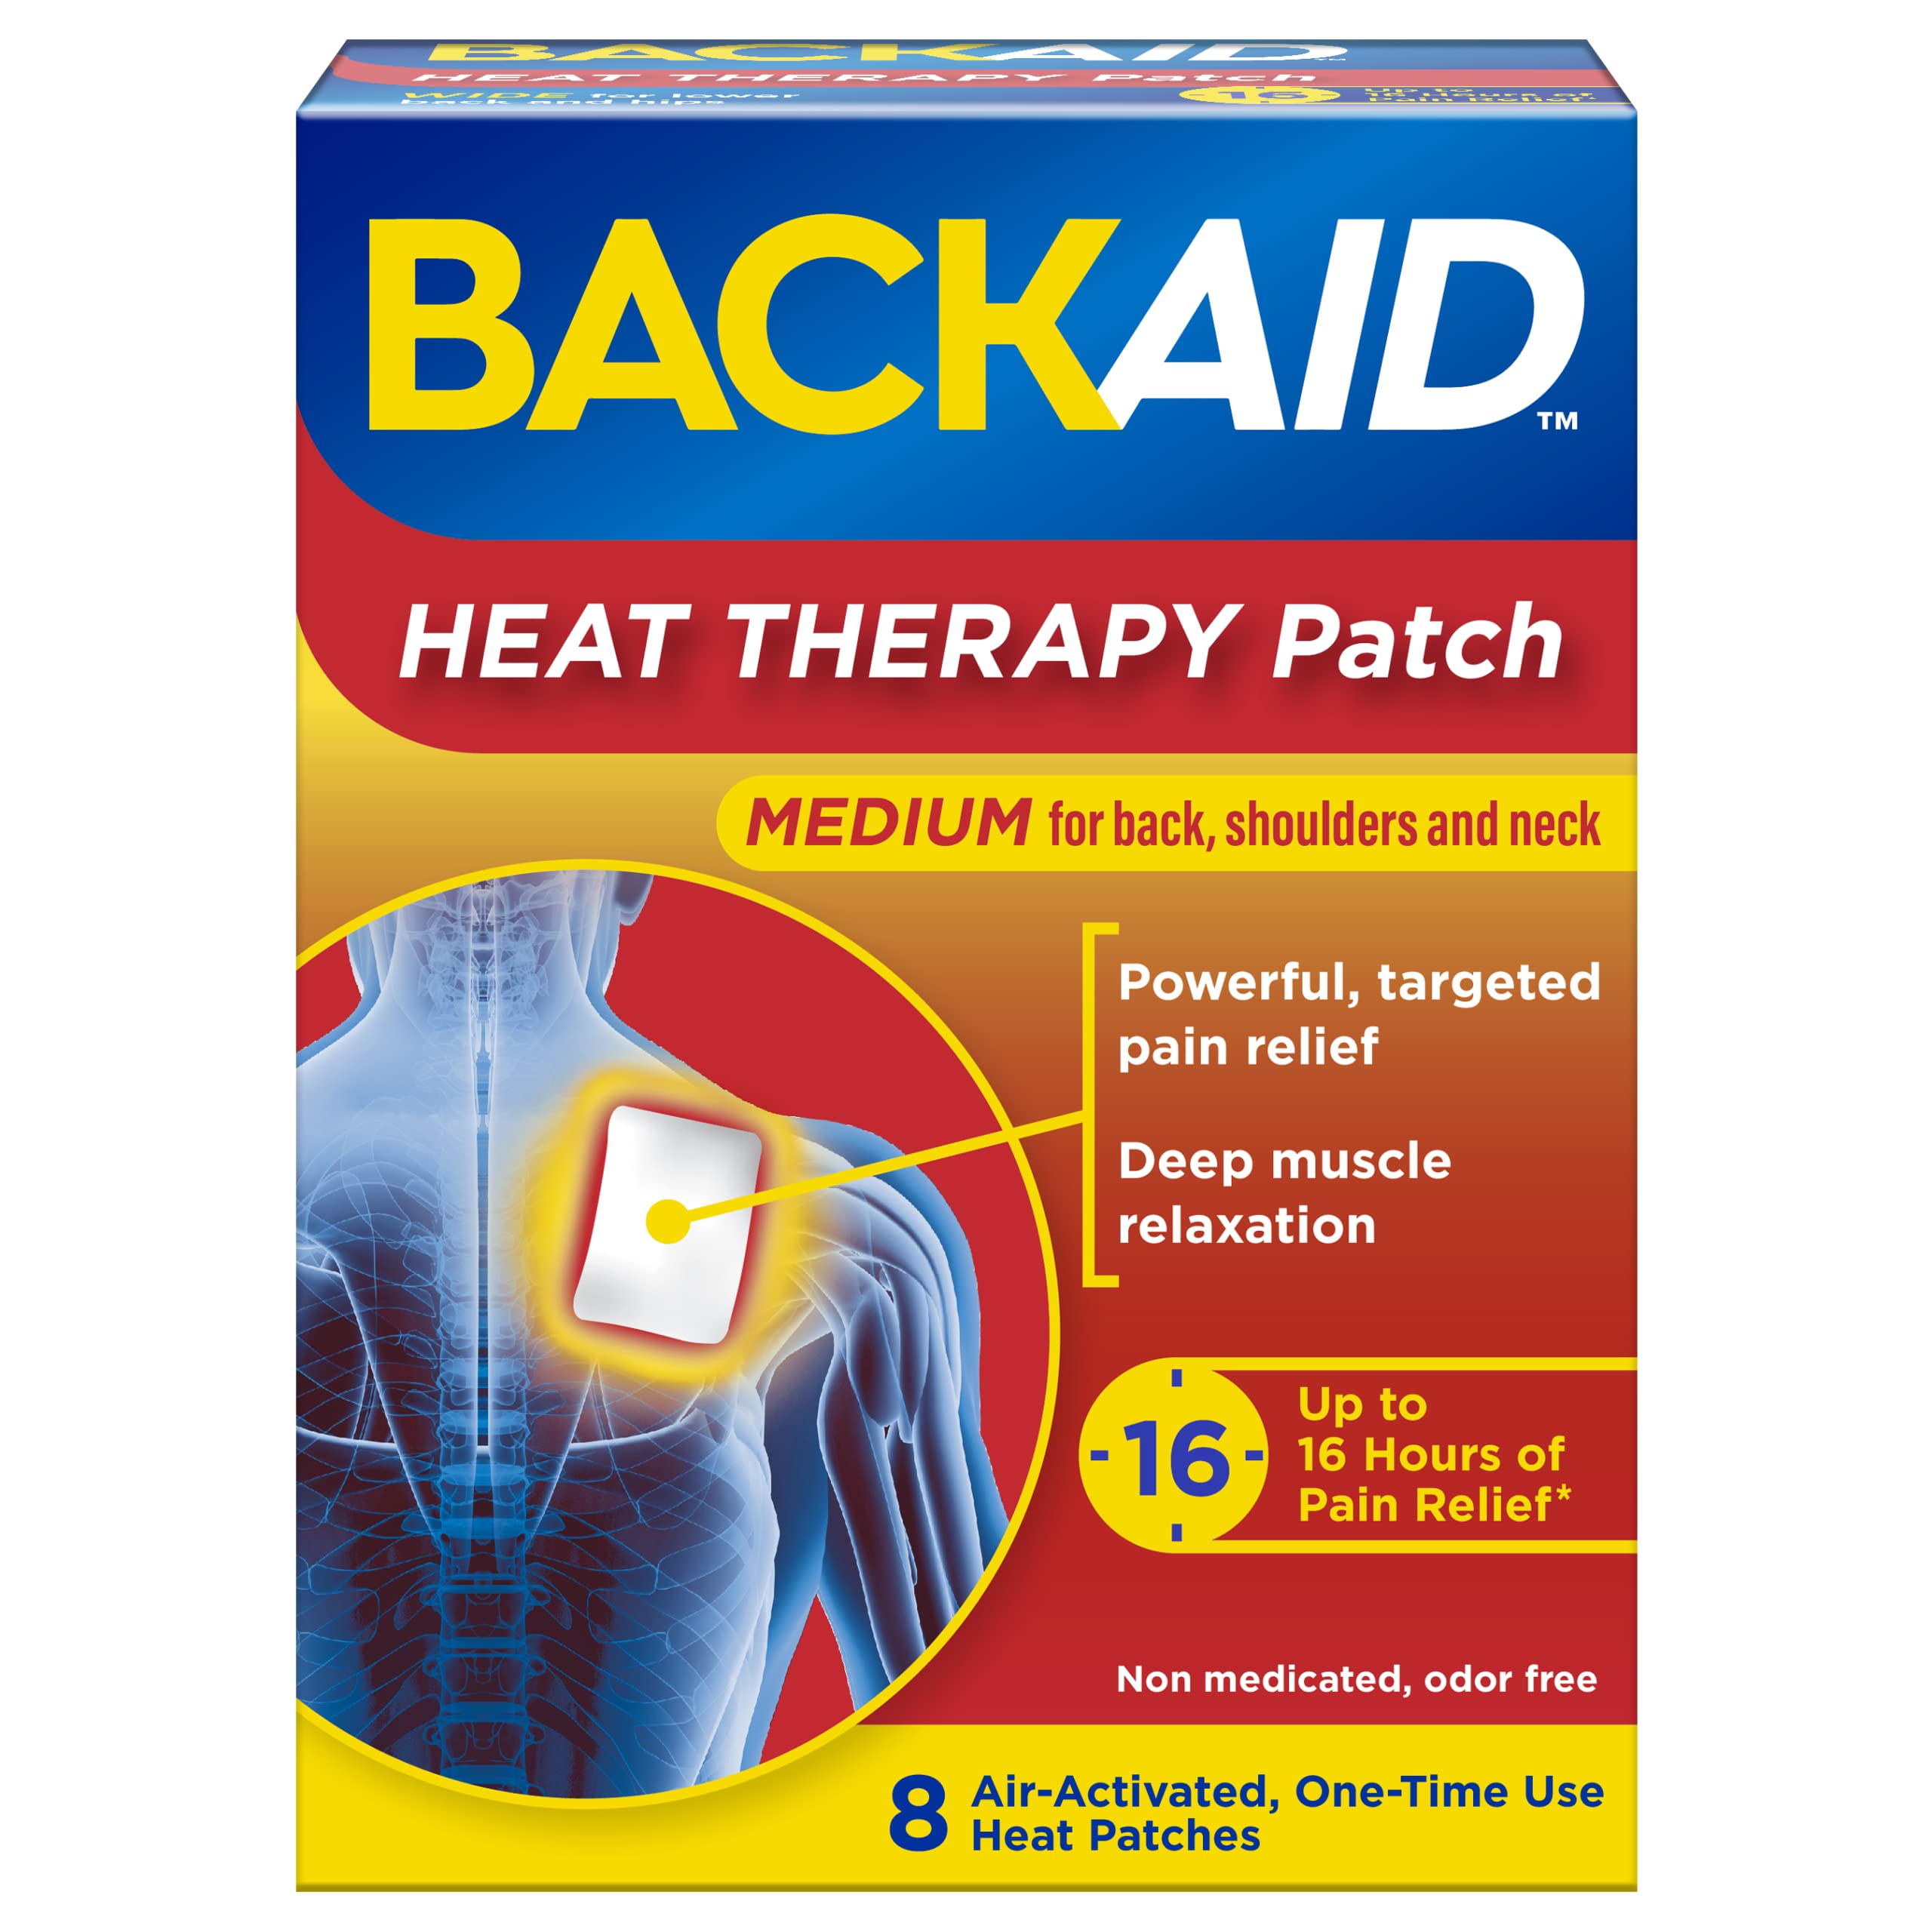 Neck Pain Reliever Pad